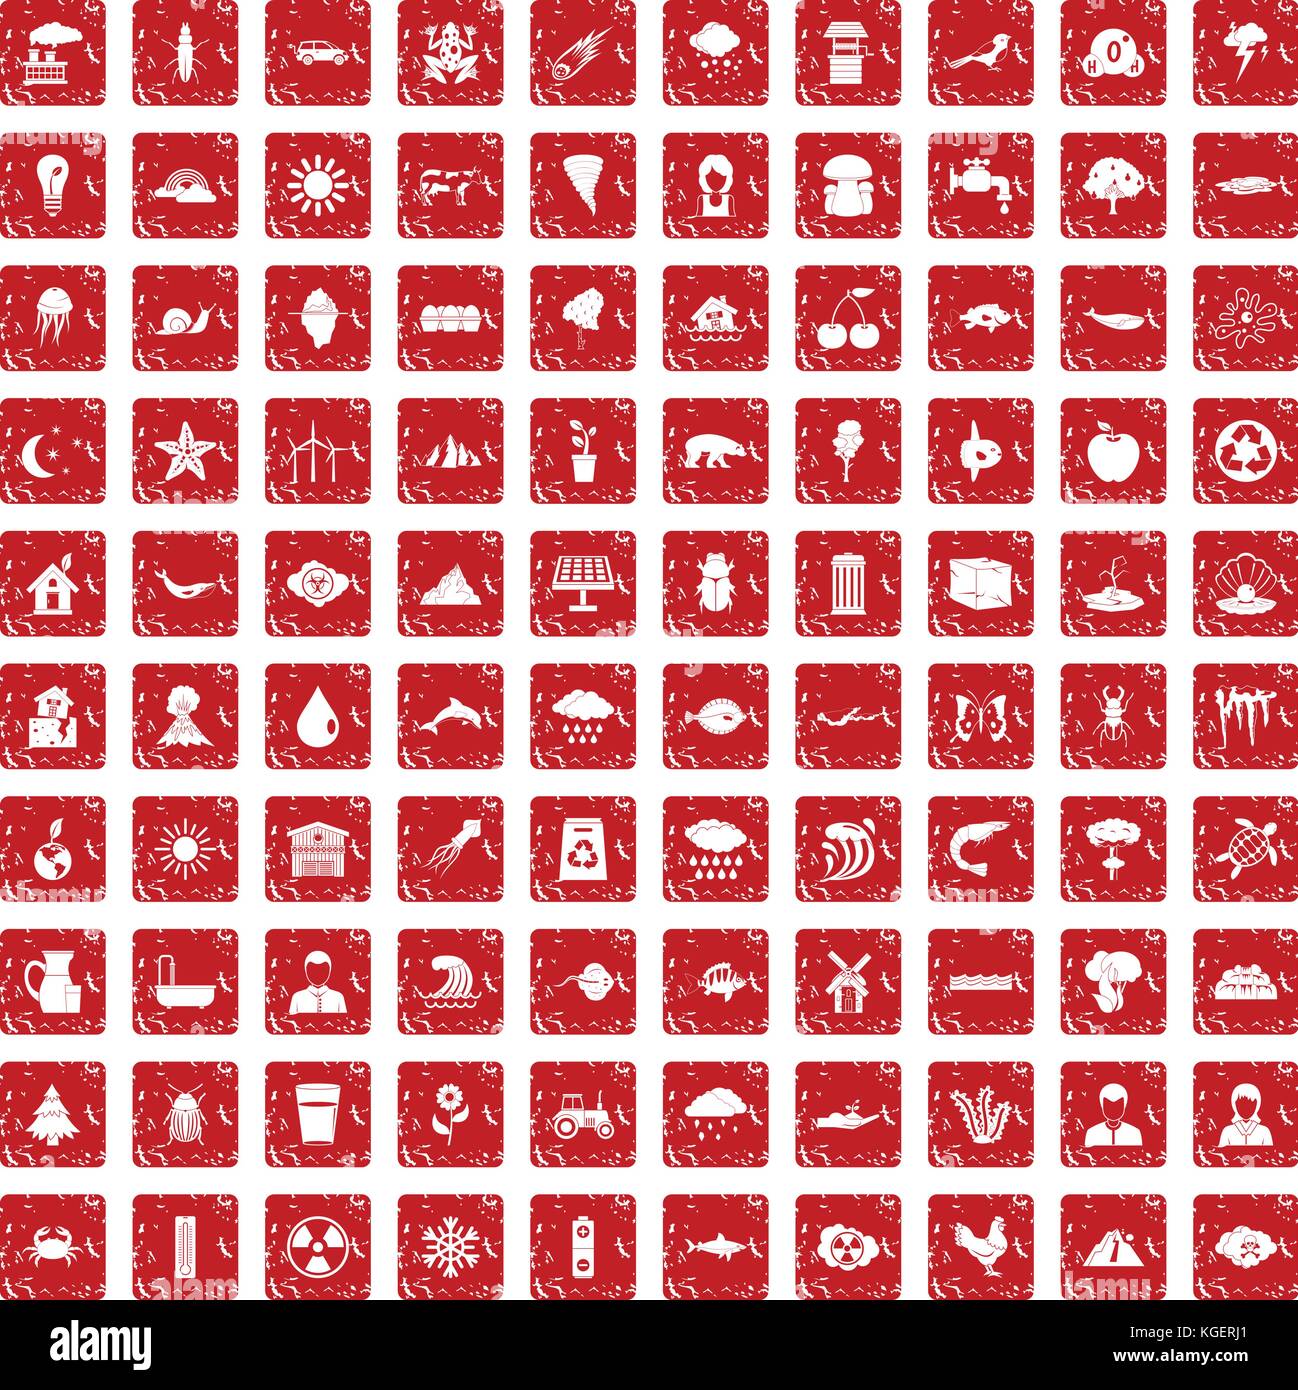 100 earth icons set grunge red Stock Vector